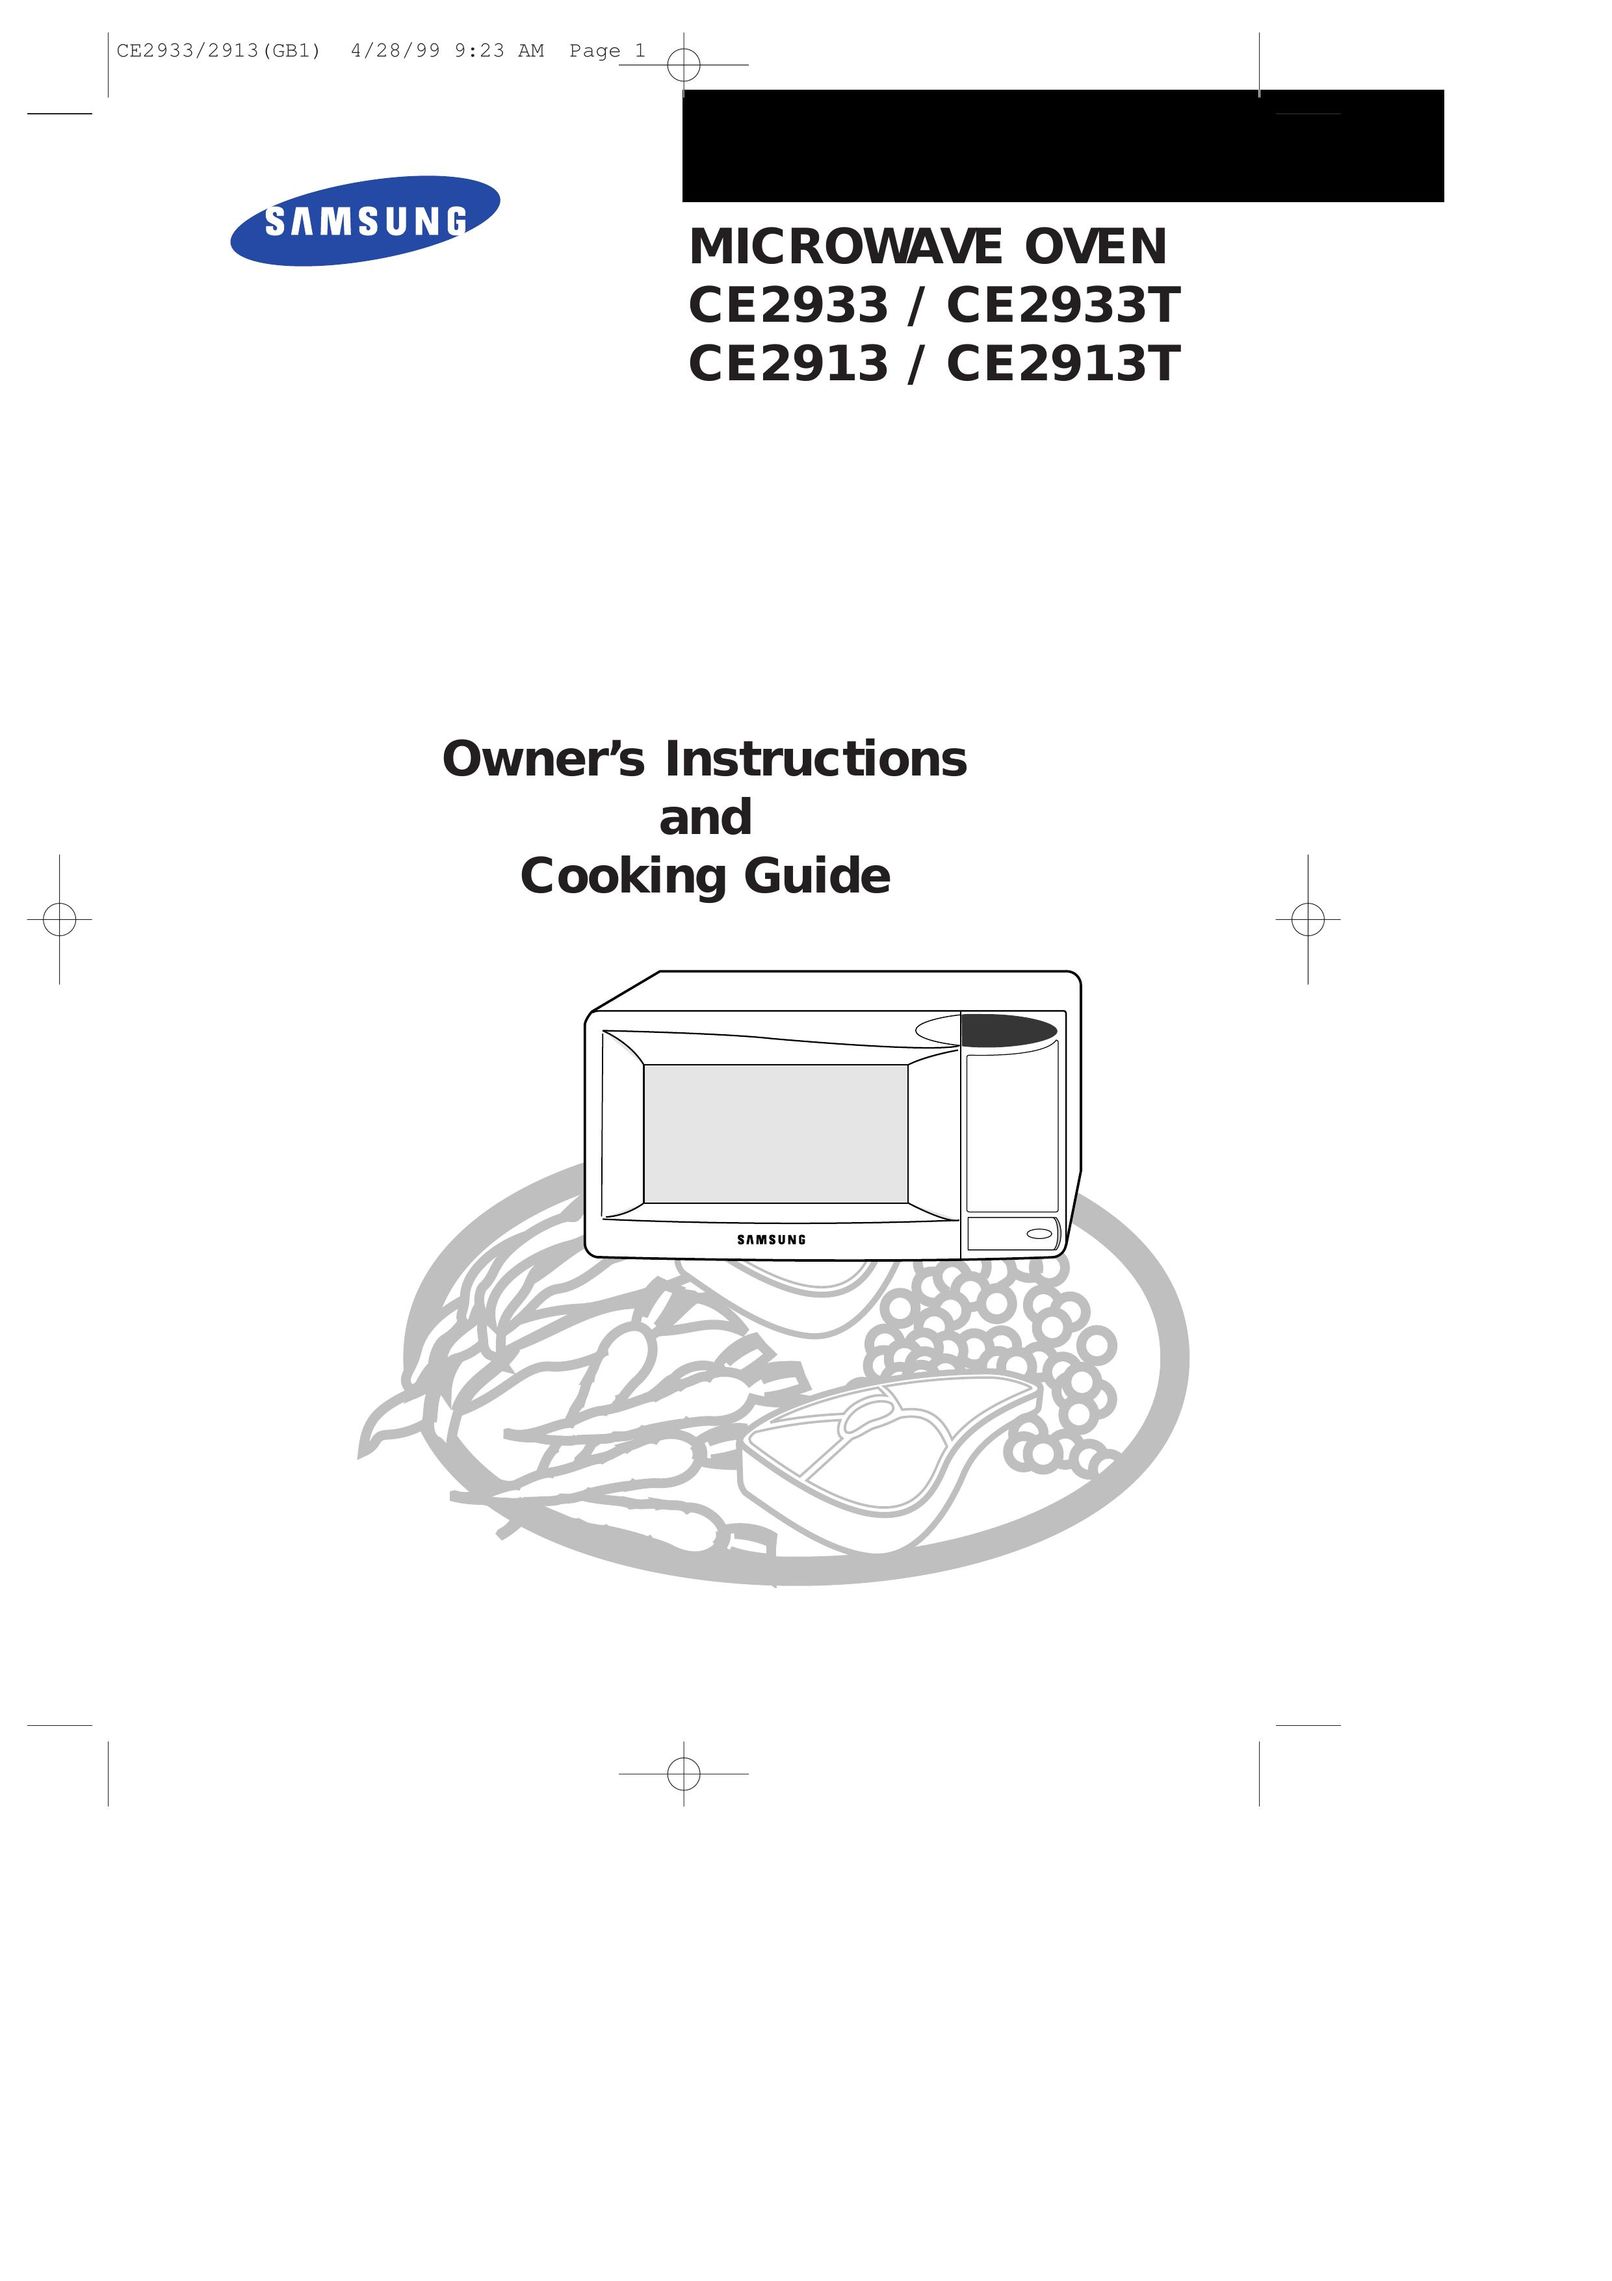 Samsung CE2913 Microwave Oven User Manual